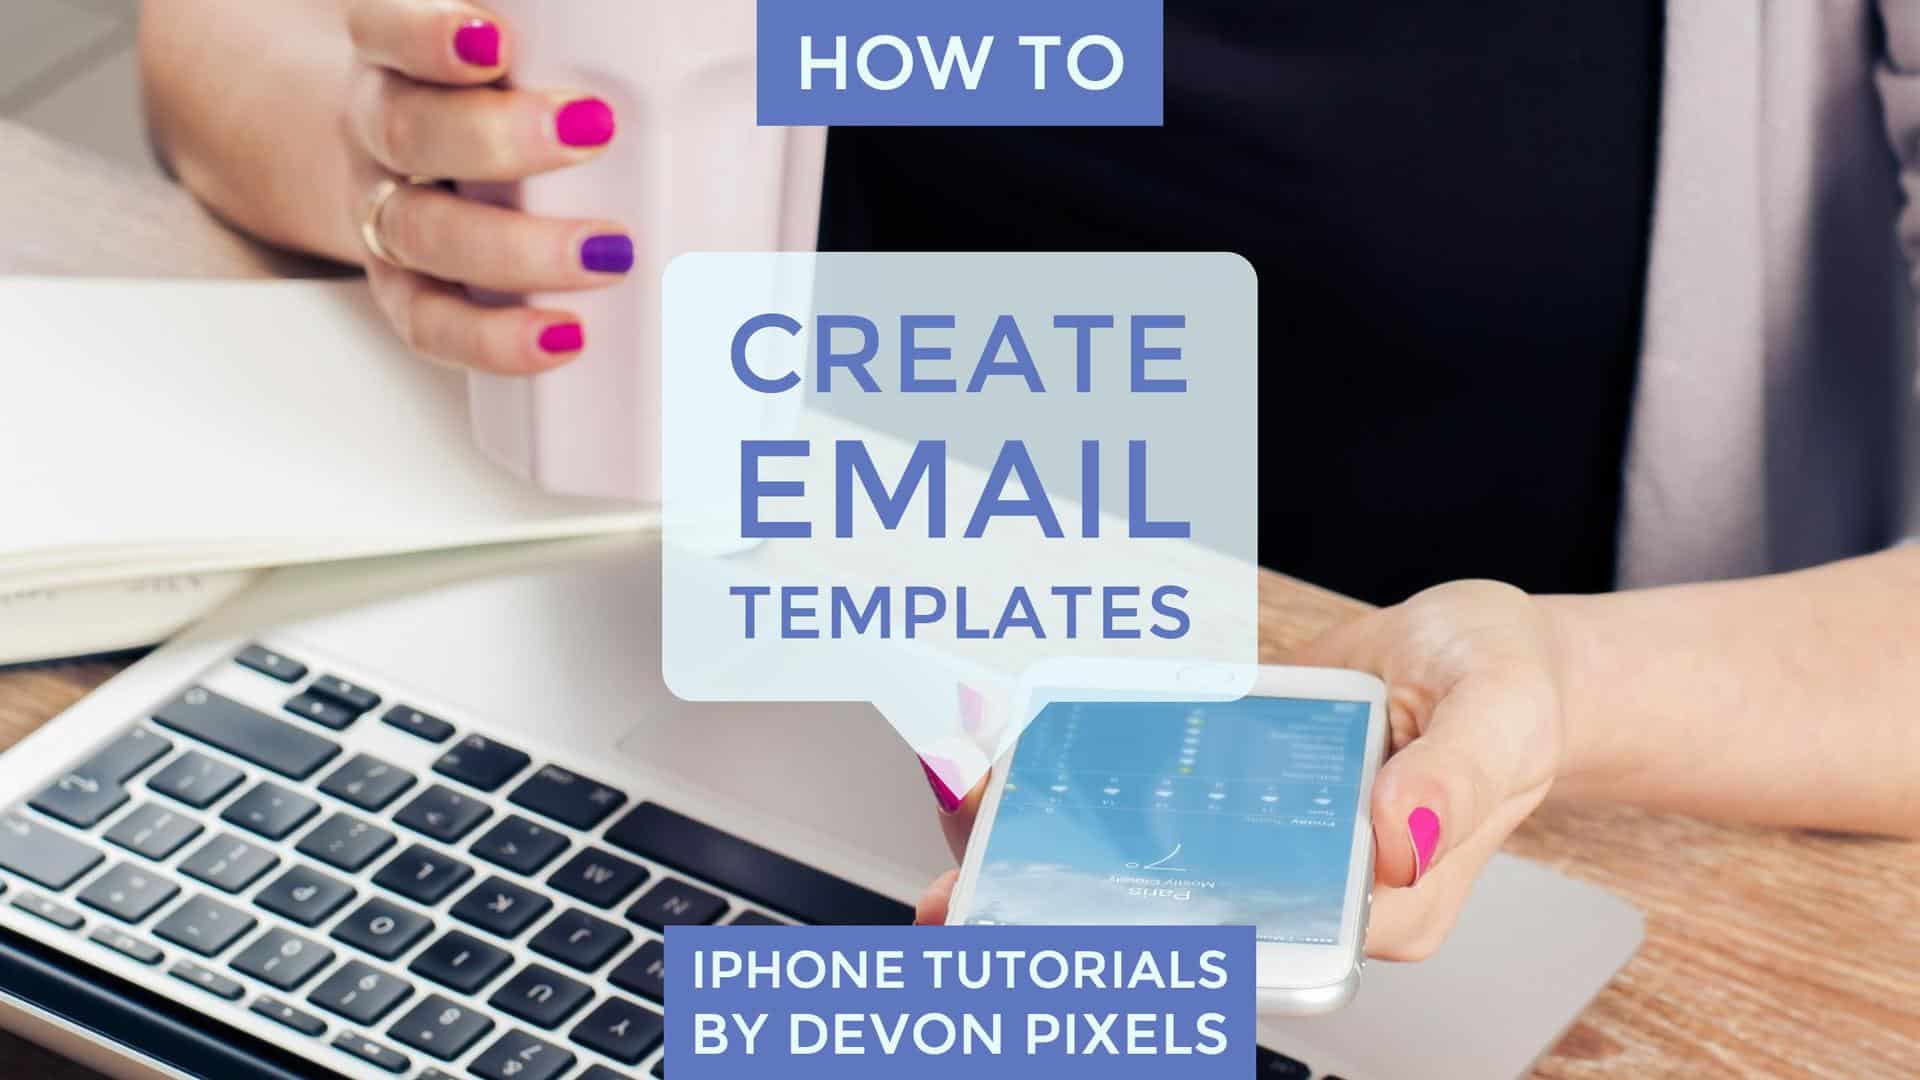 How to Create Email Templates on an iPhone - iPhone Tutorial